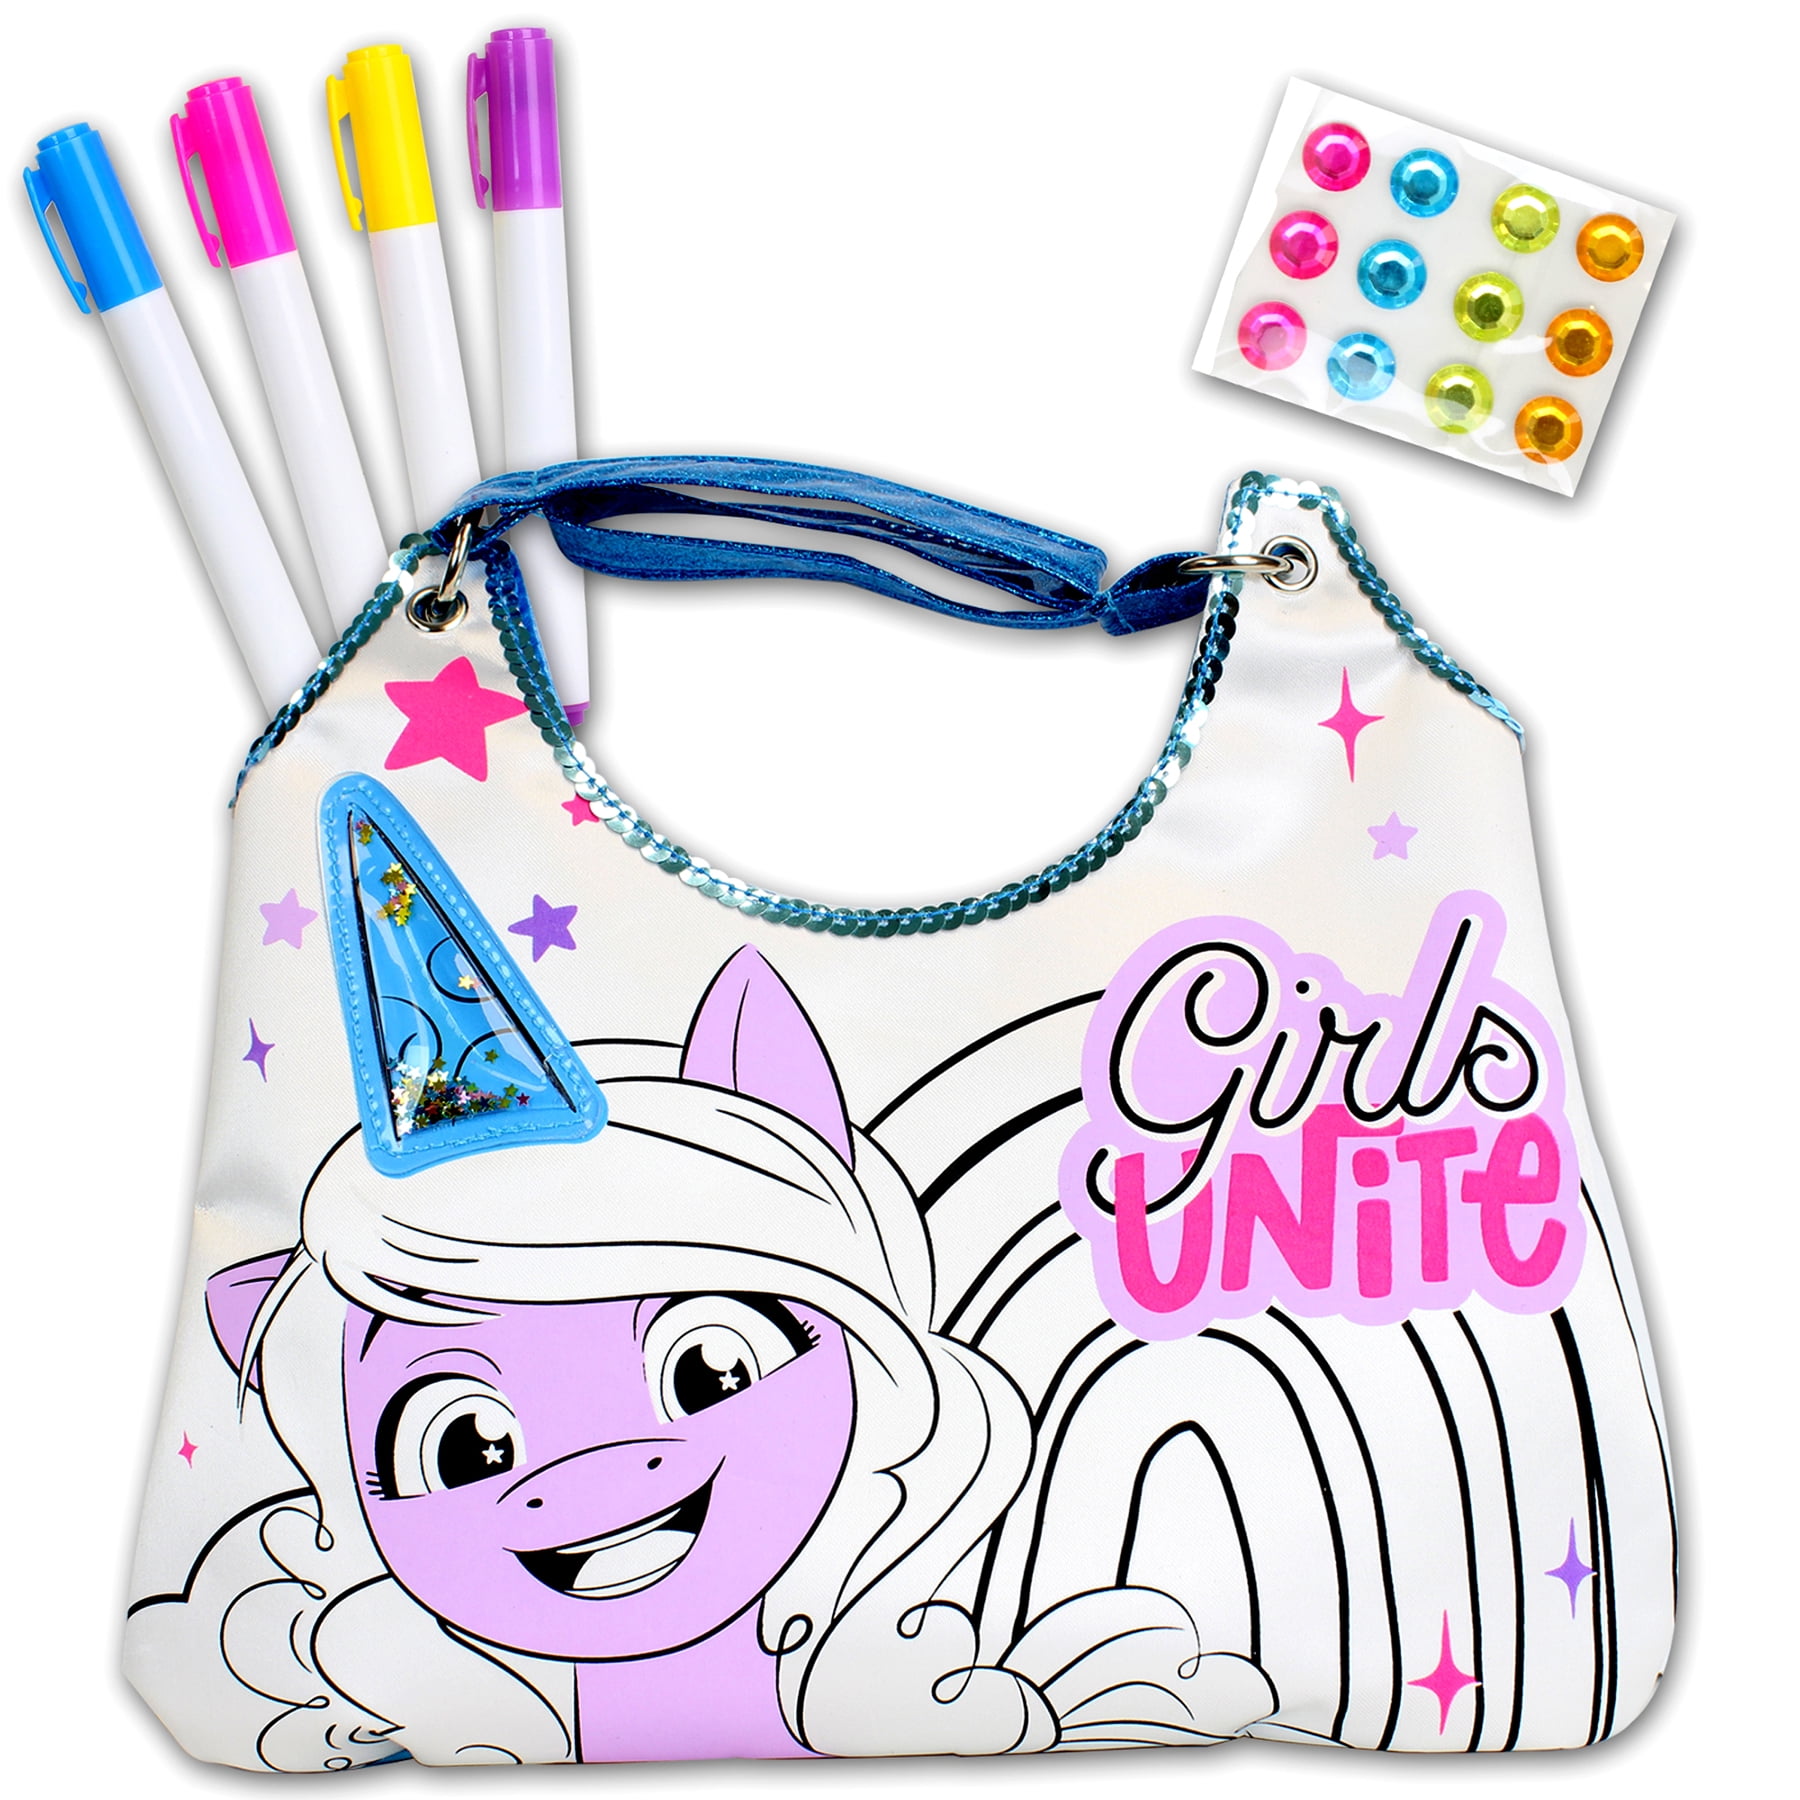 Create Your Own Tote Bag Using Paint Pens | Zieler Tote Bag With Paint Pens